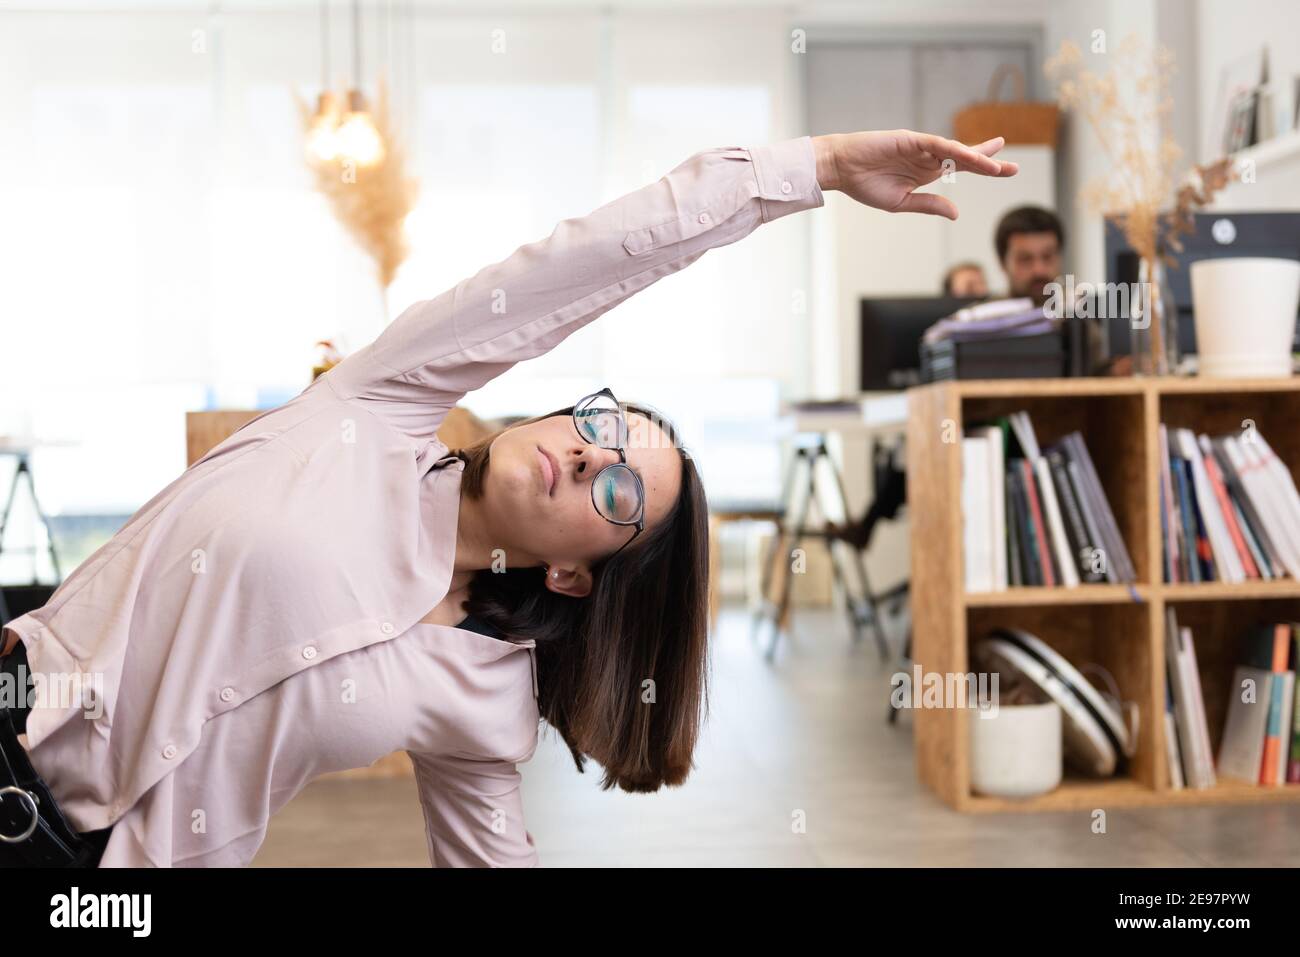 Hispanic female worker having a break to stretch and relax in the office. Stock Photo